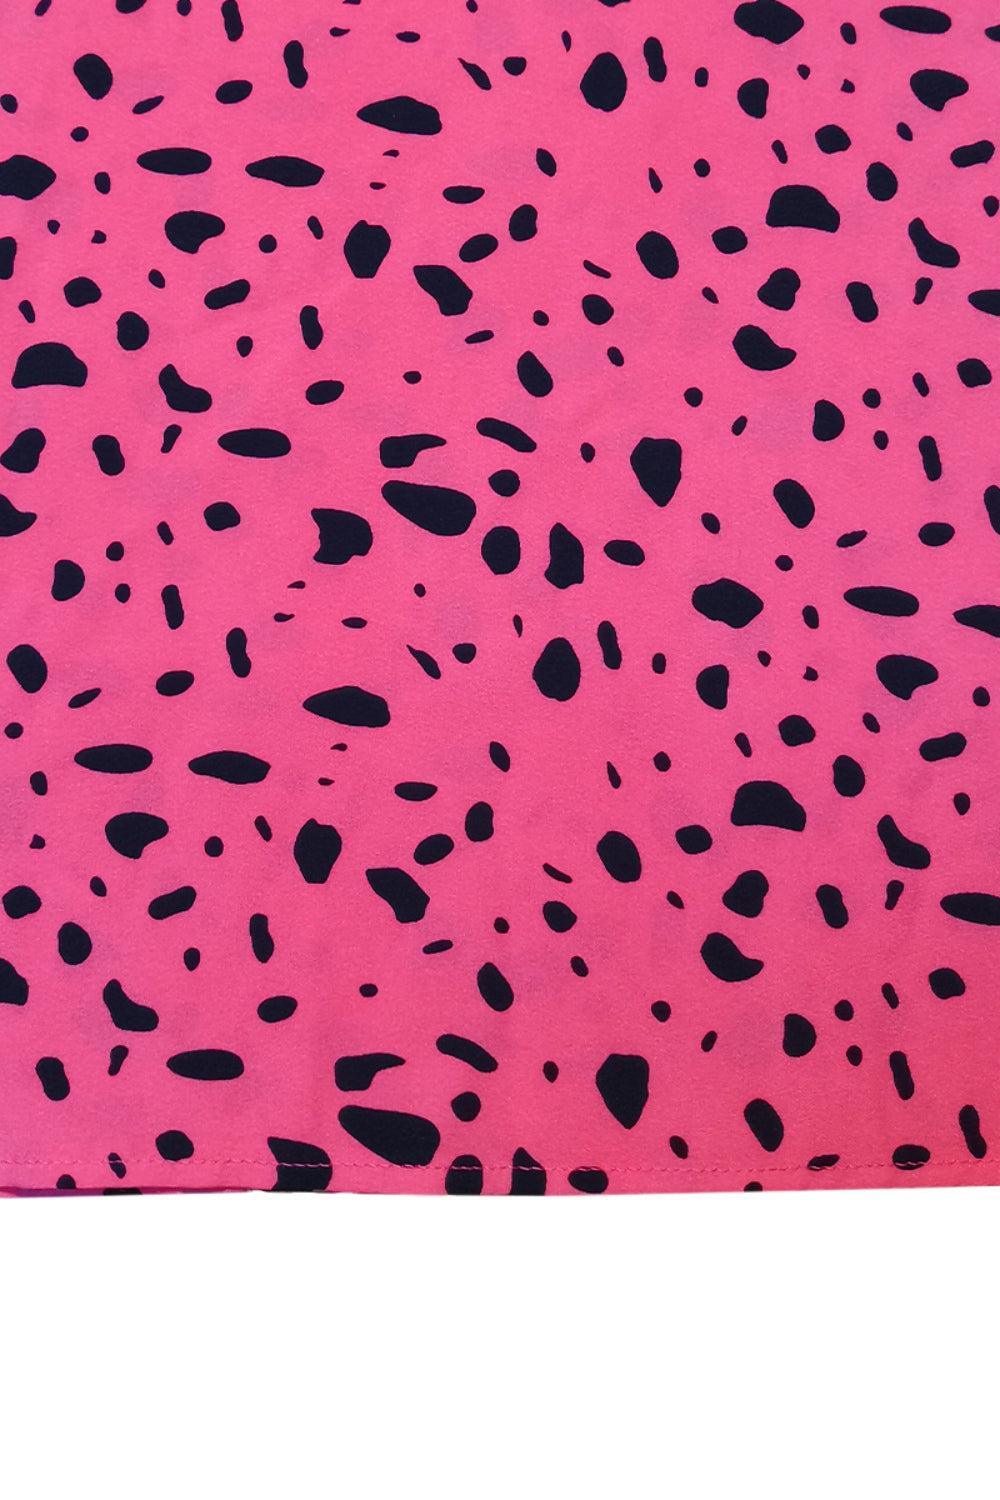 a pink and black animal print rug on a white background